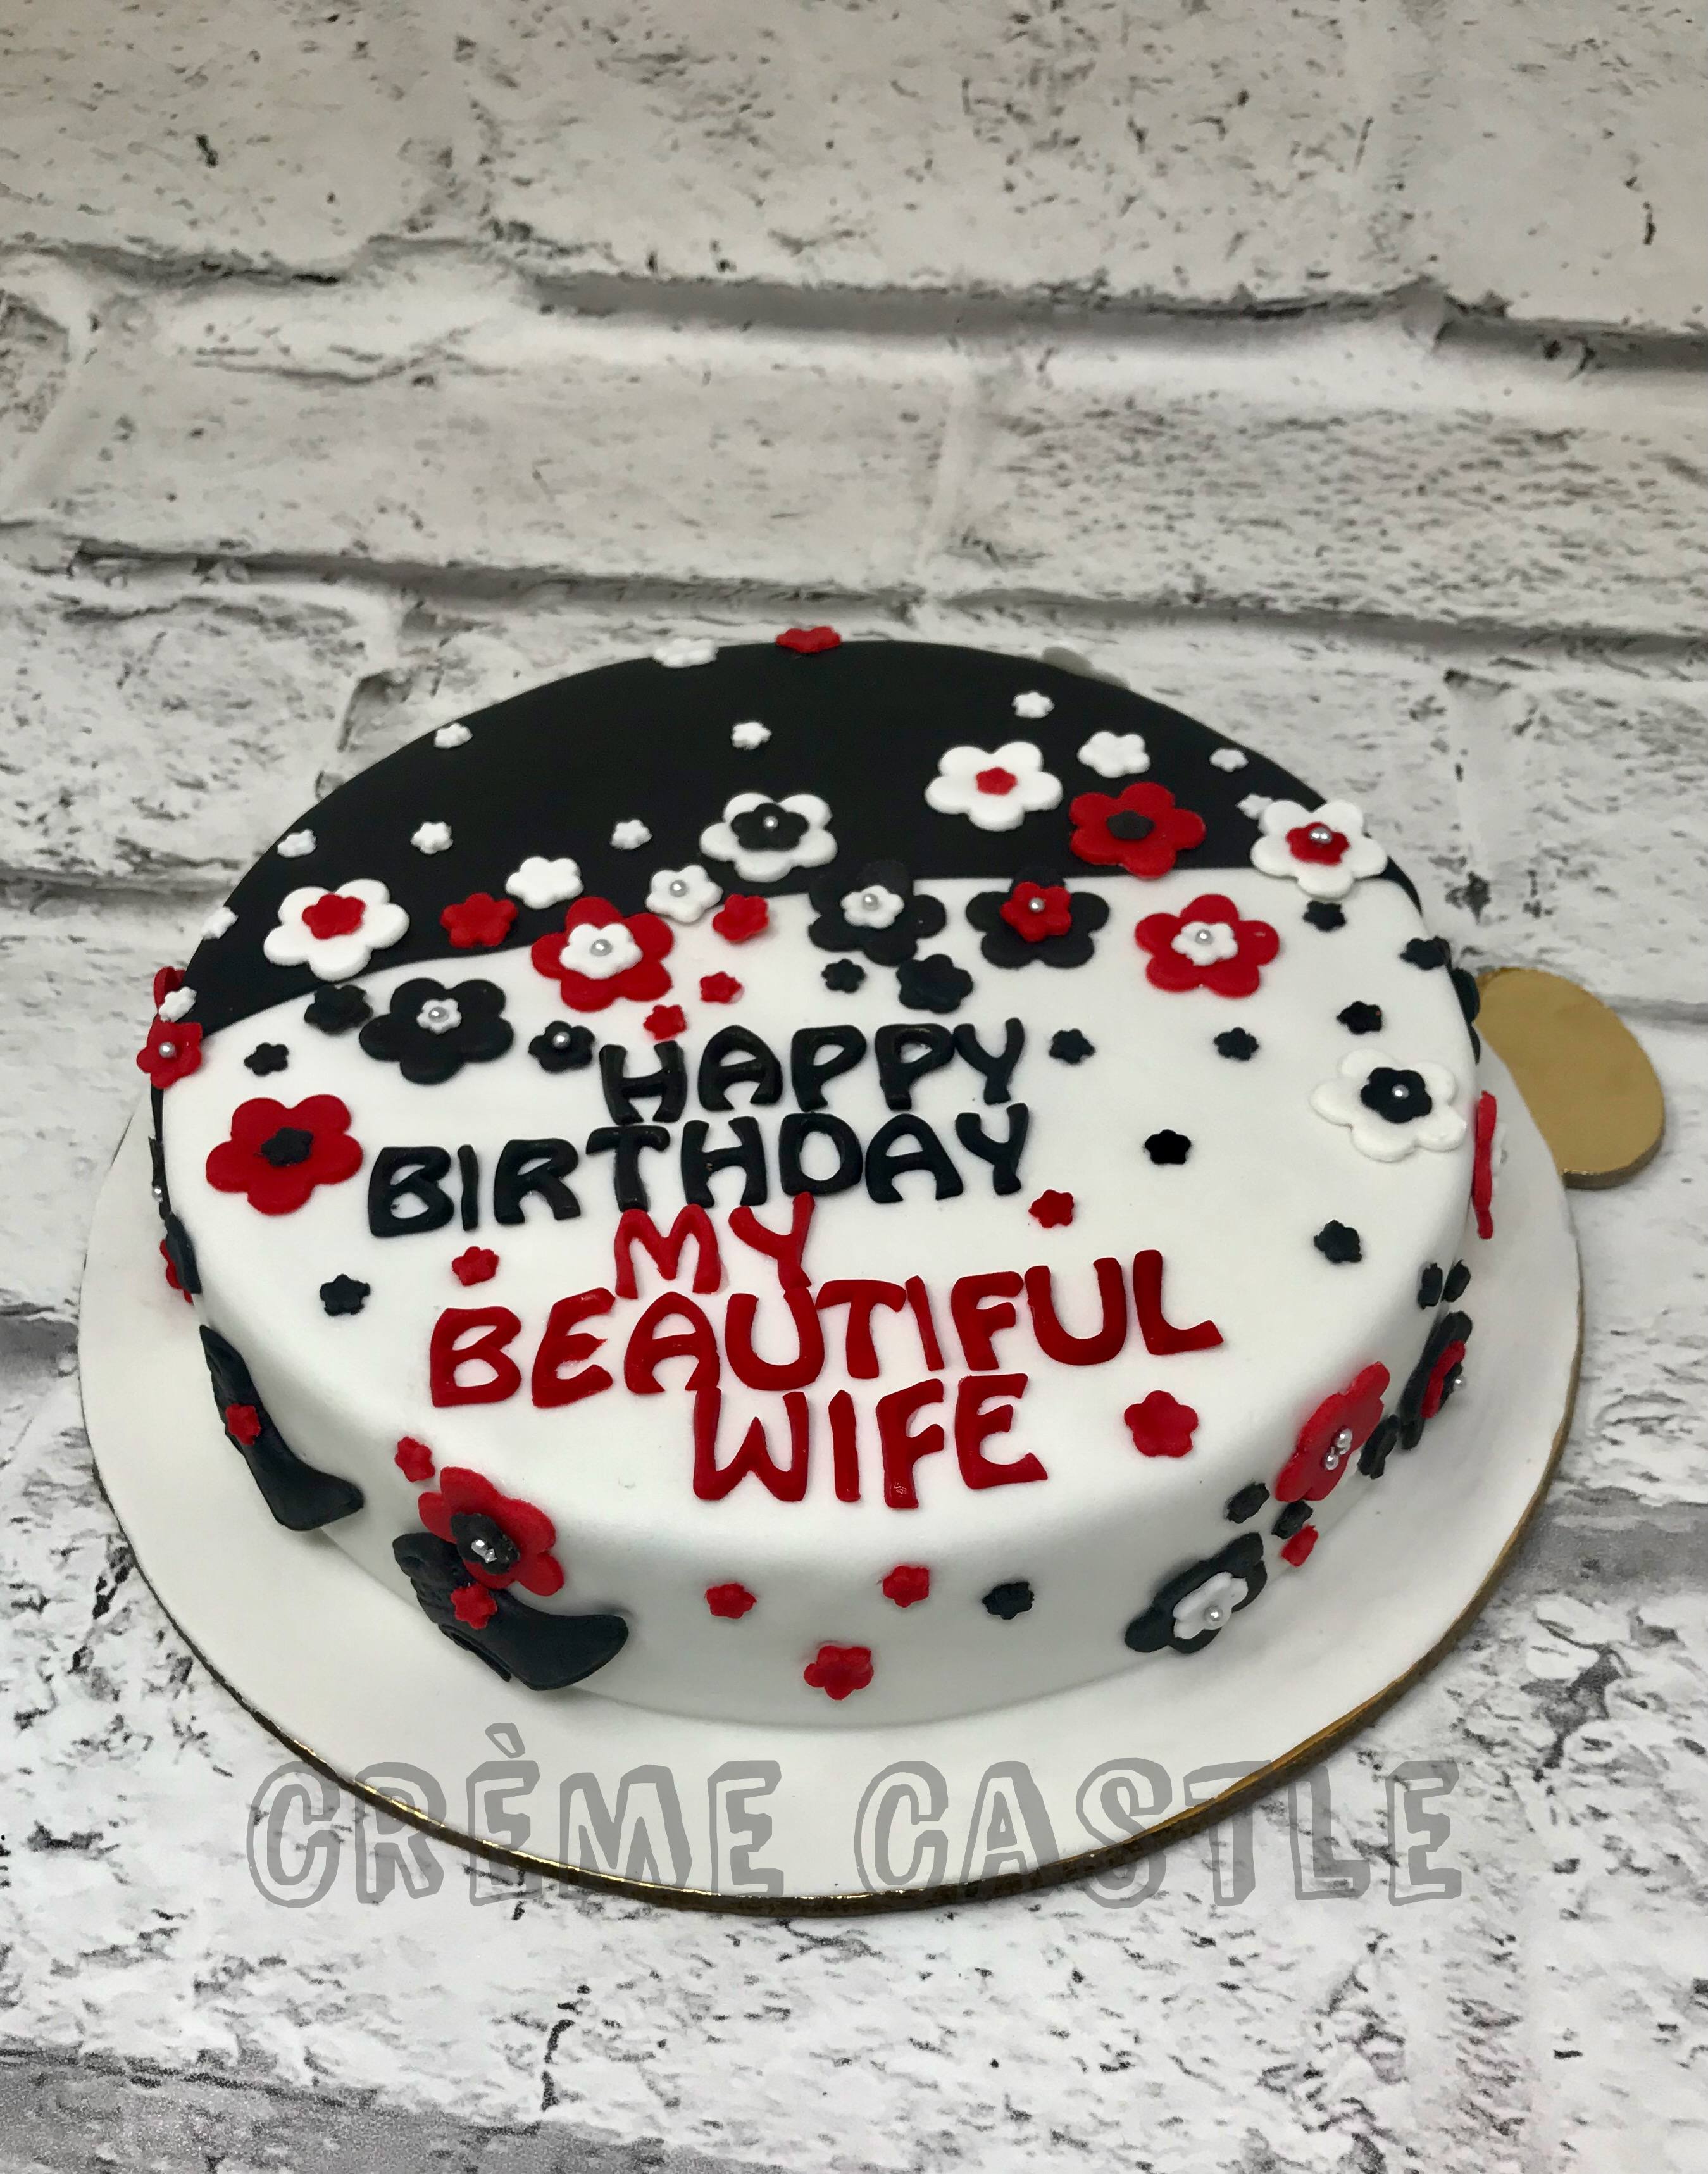 Yahvi - Happy Birthday love ❤❤ Cake by: @bakershub_by_parul #cake  #cakedesign #romantic #romanticcouples #redvelvet #redvelvetcake #yummycake  #birthday #birthdaycake #mylove #happybirthday #candles #specialday  #specialperson #perfectnight #heart ...